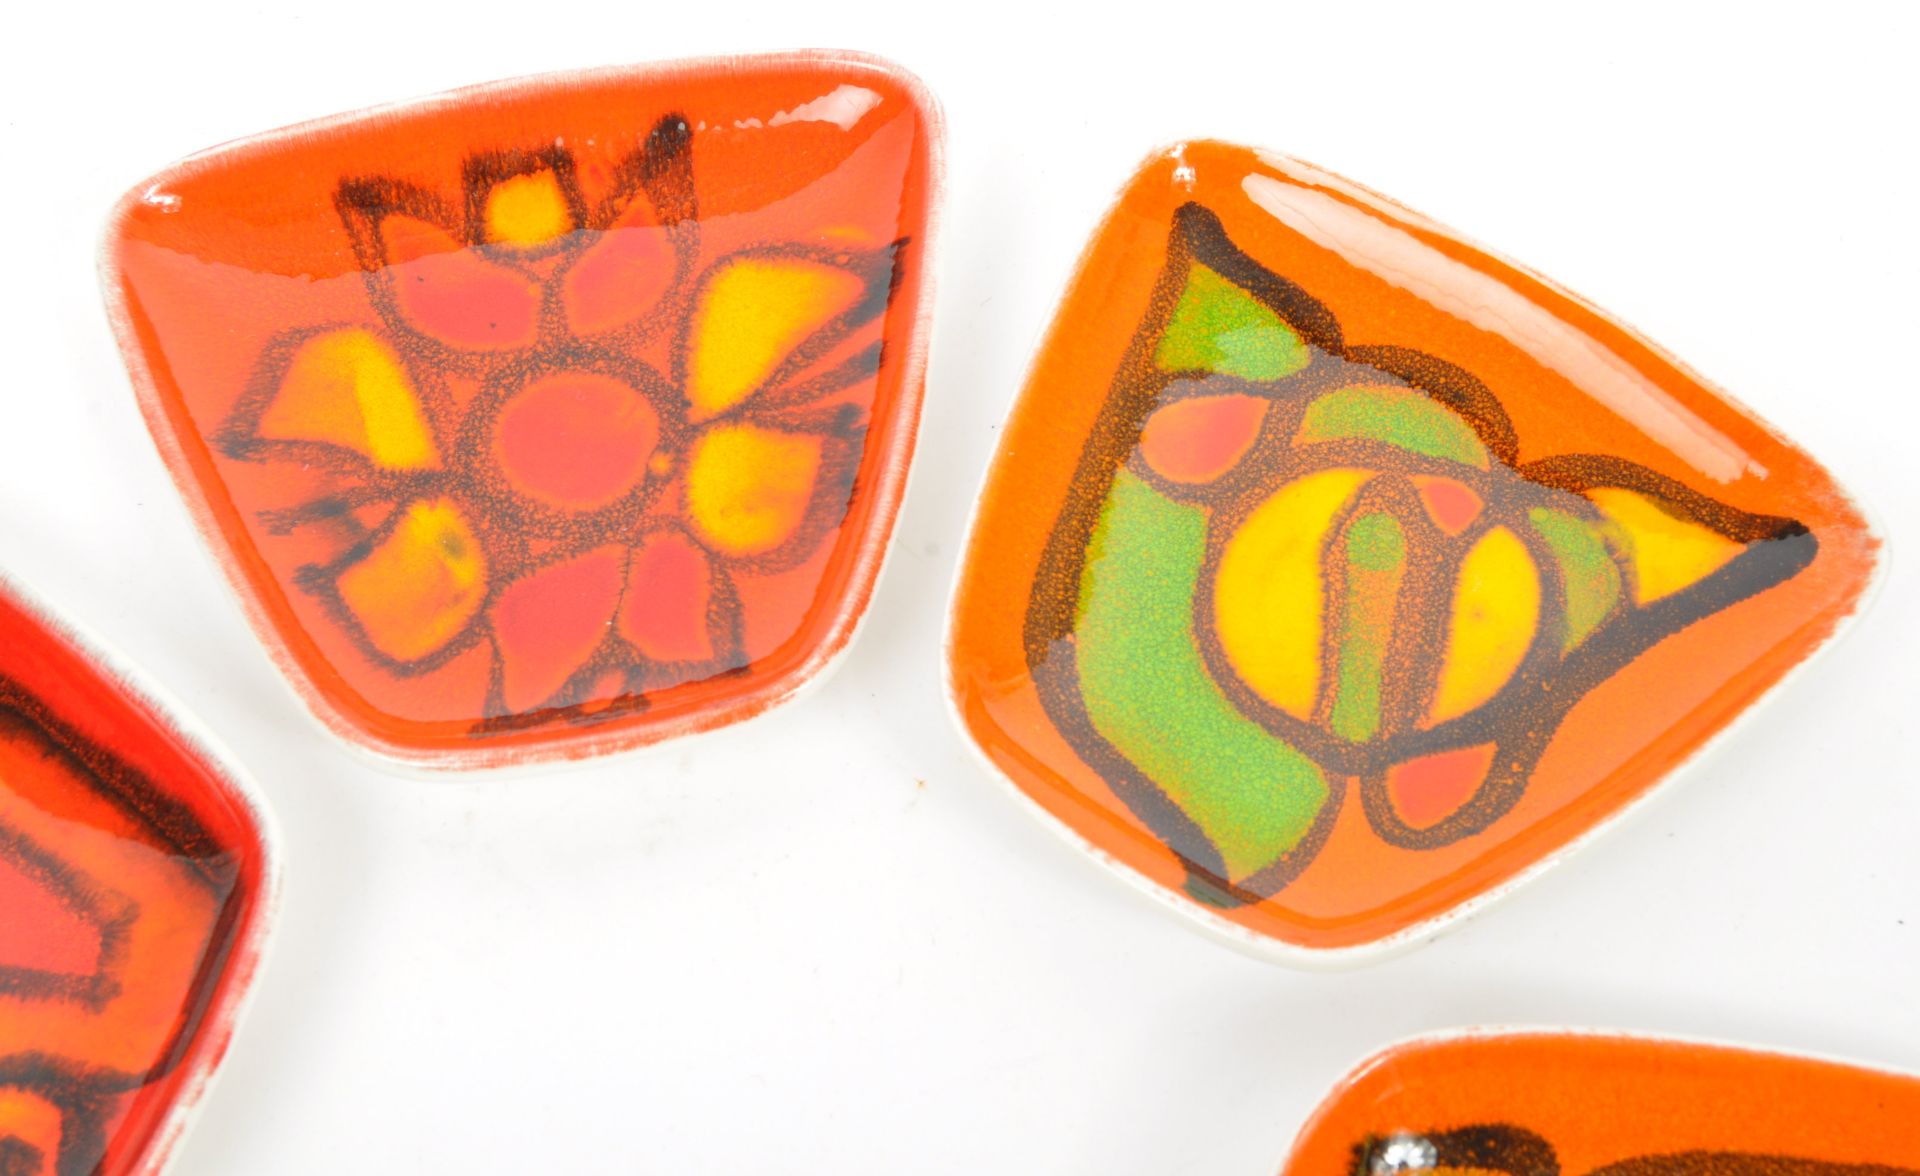 COLLECTION OF SIX DELPHIS RANGE PIN DISHES BY POOLE POTTERY - Image 3 of 6